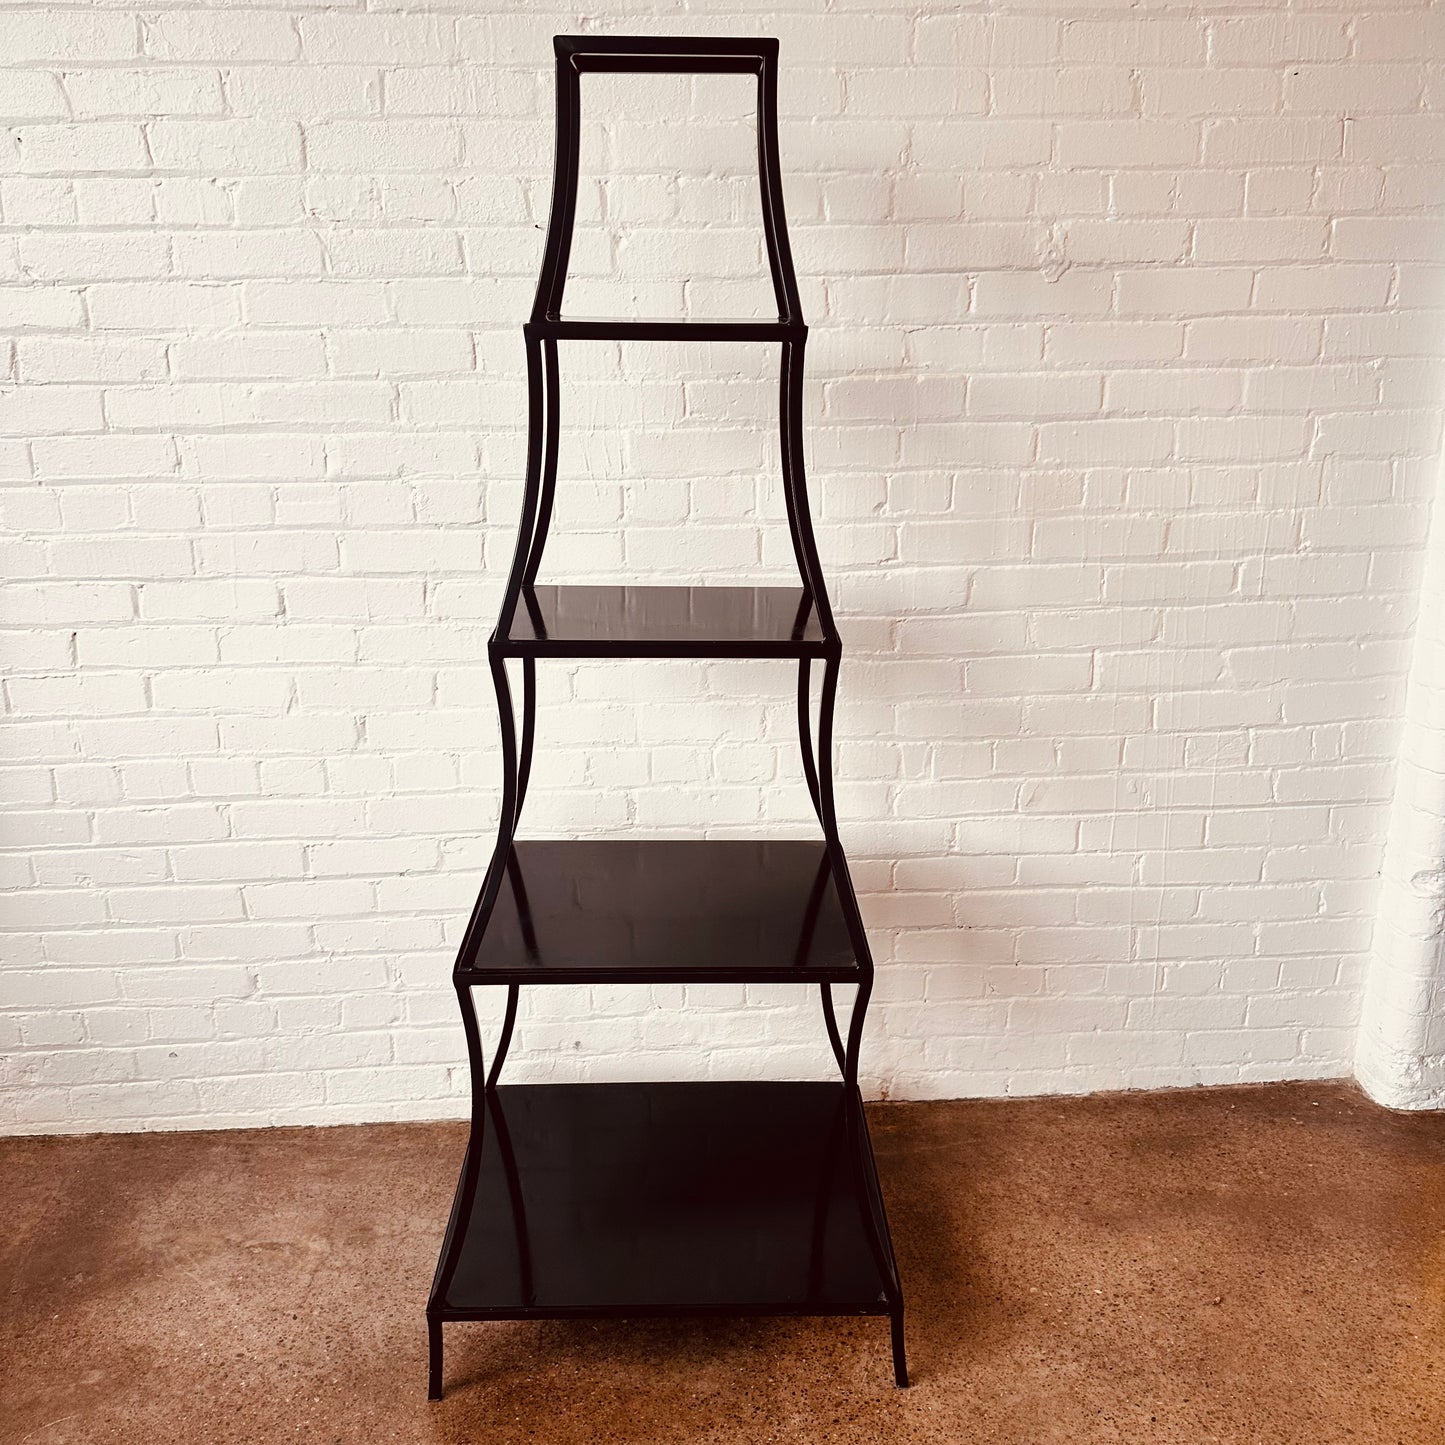 METAL ETAGERE WITH 5 OPEN SHELVES IN PAGODA STYLE